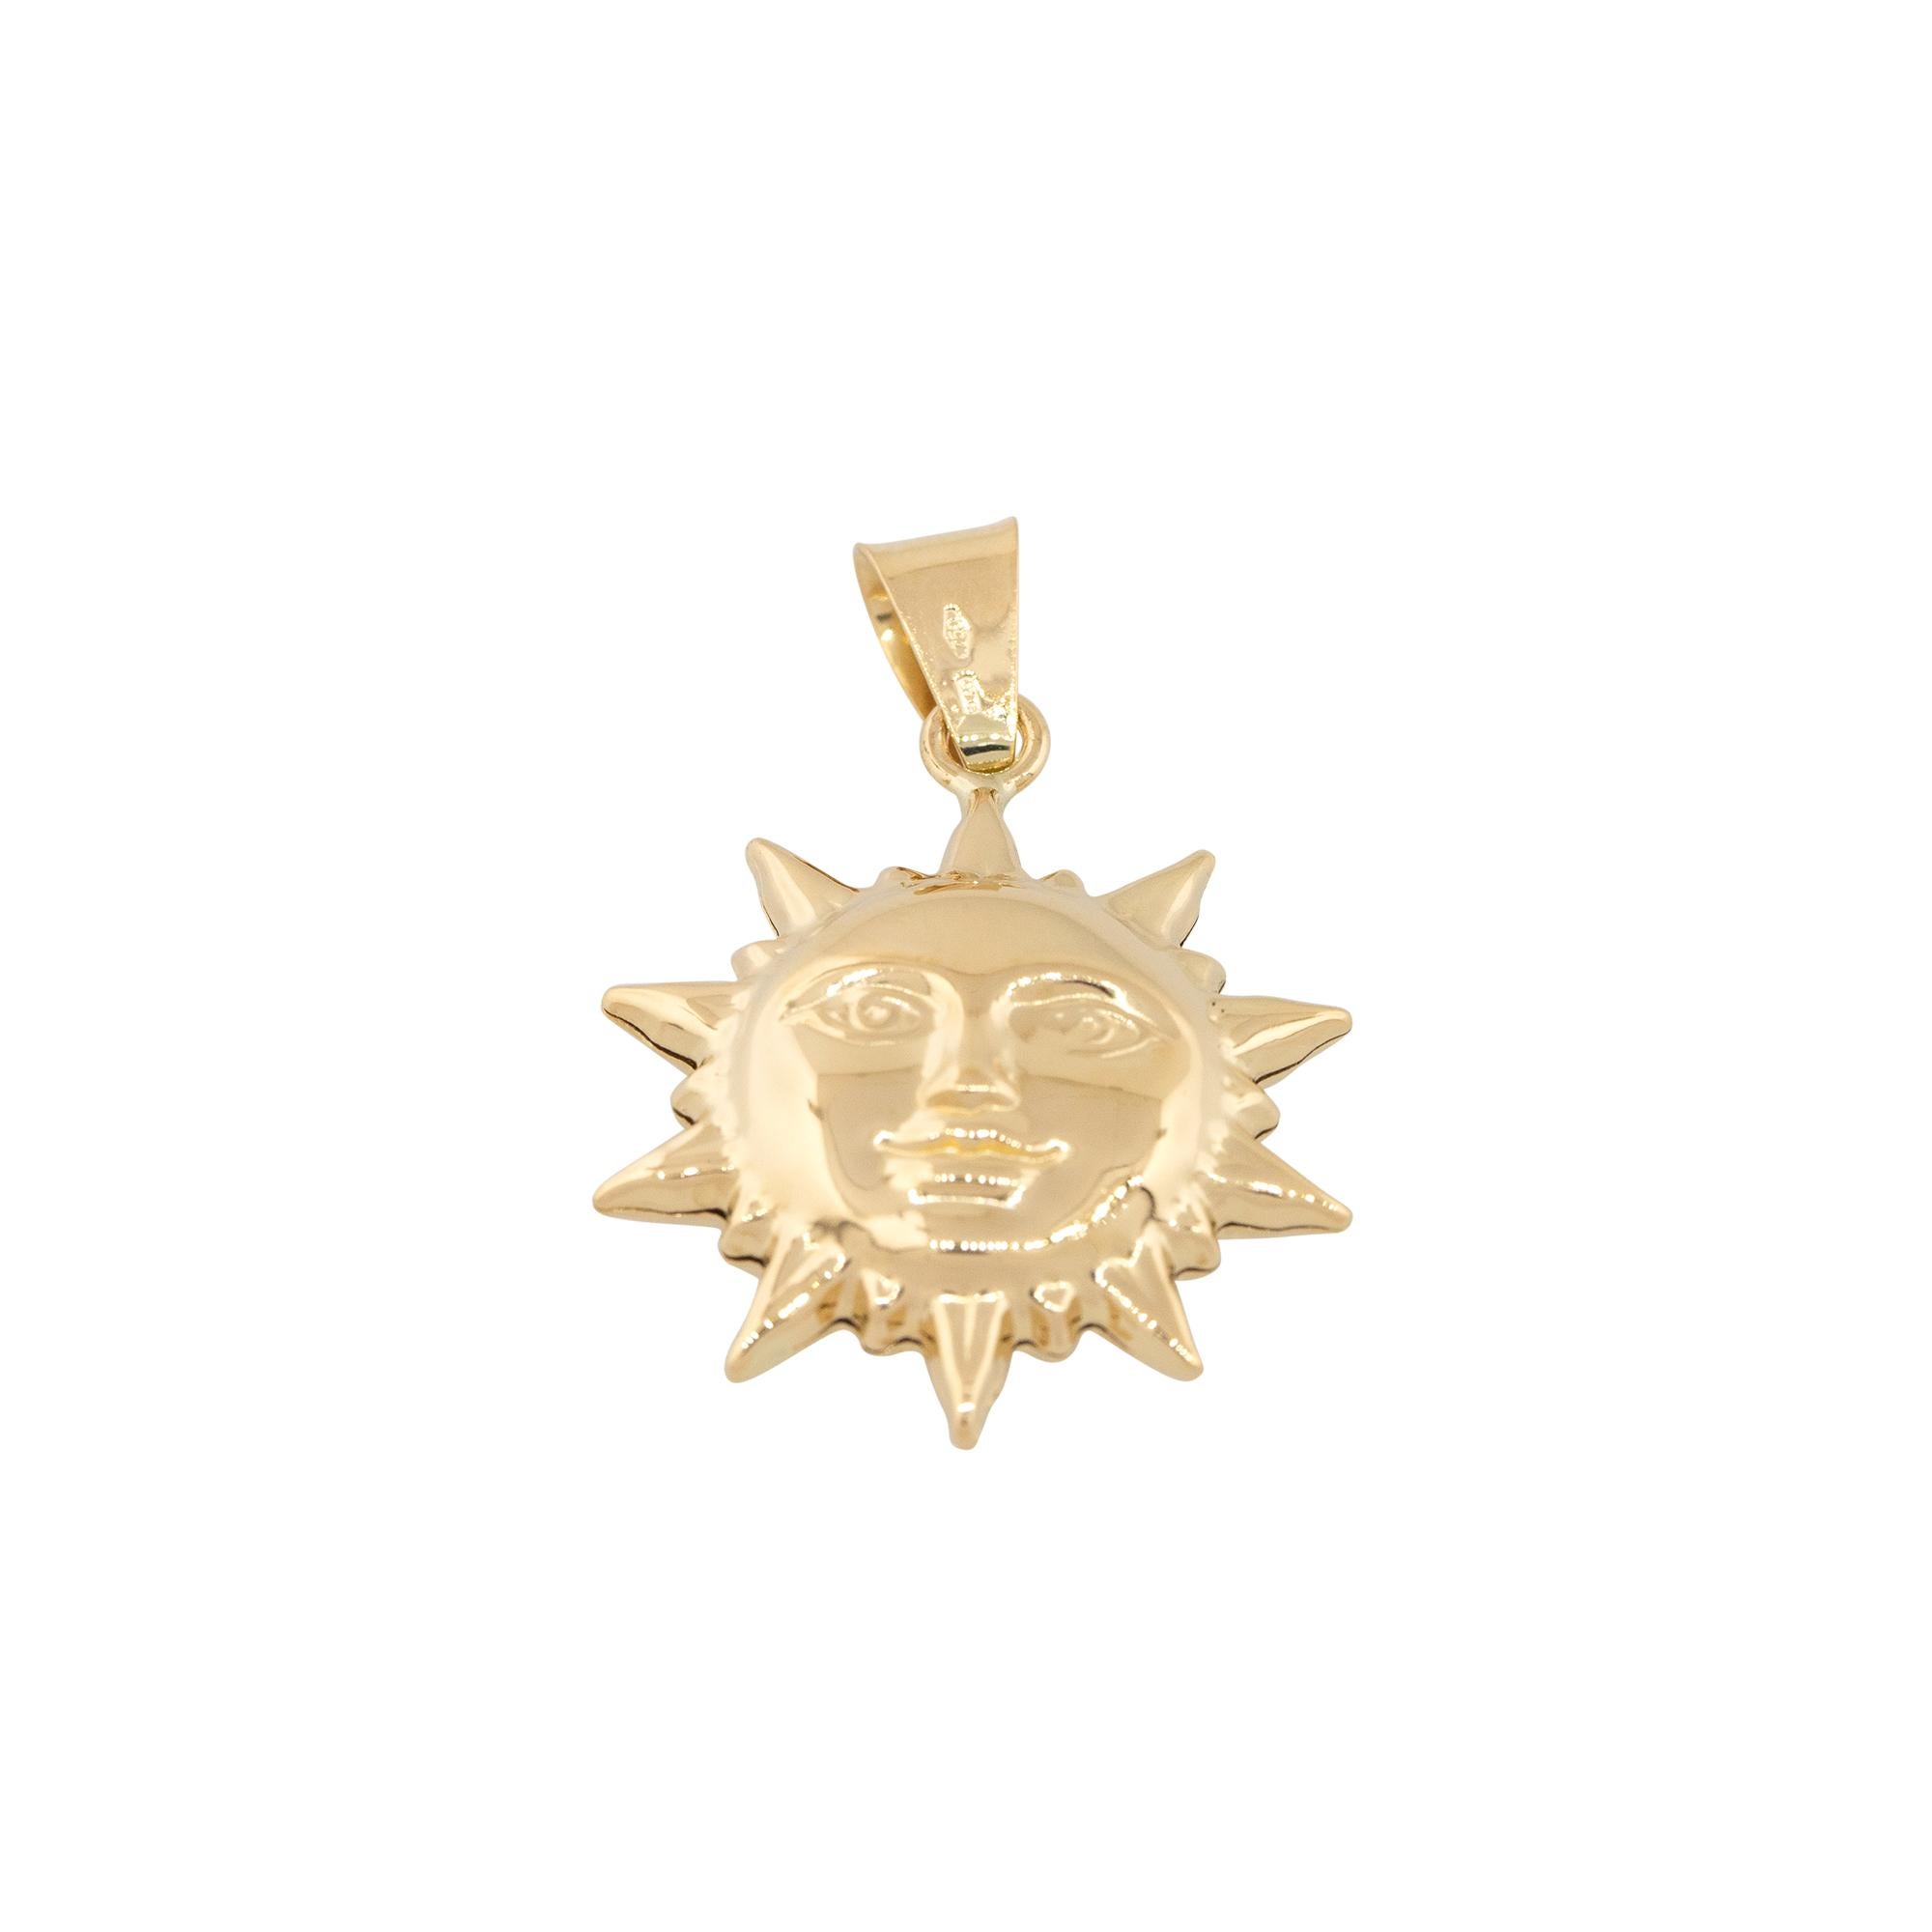 18k Yellow Gold Happy Sun Pendant

Material: 18k Yellow Gold
Item Weight: 2.6g (1.7dwt)
Item Dimensions: 21.53mm x 7.78mm x 22.39mm
Additional Details: This item also comes with a presentation box!
SKU: G12855